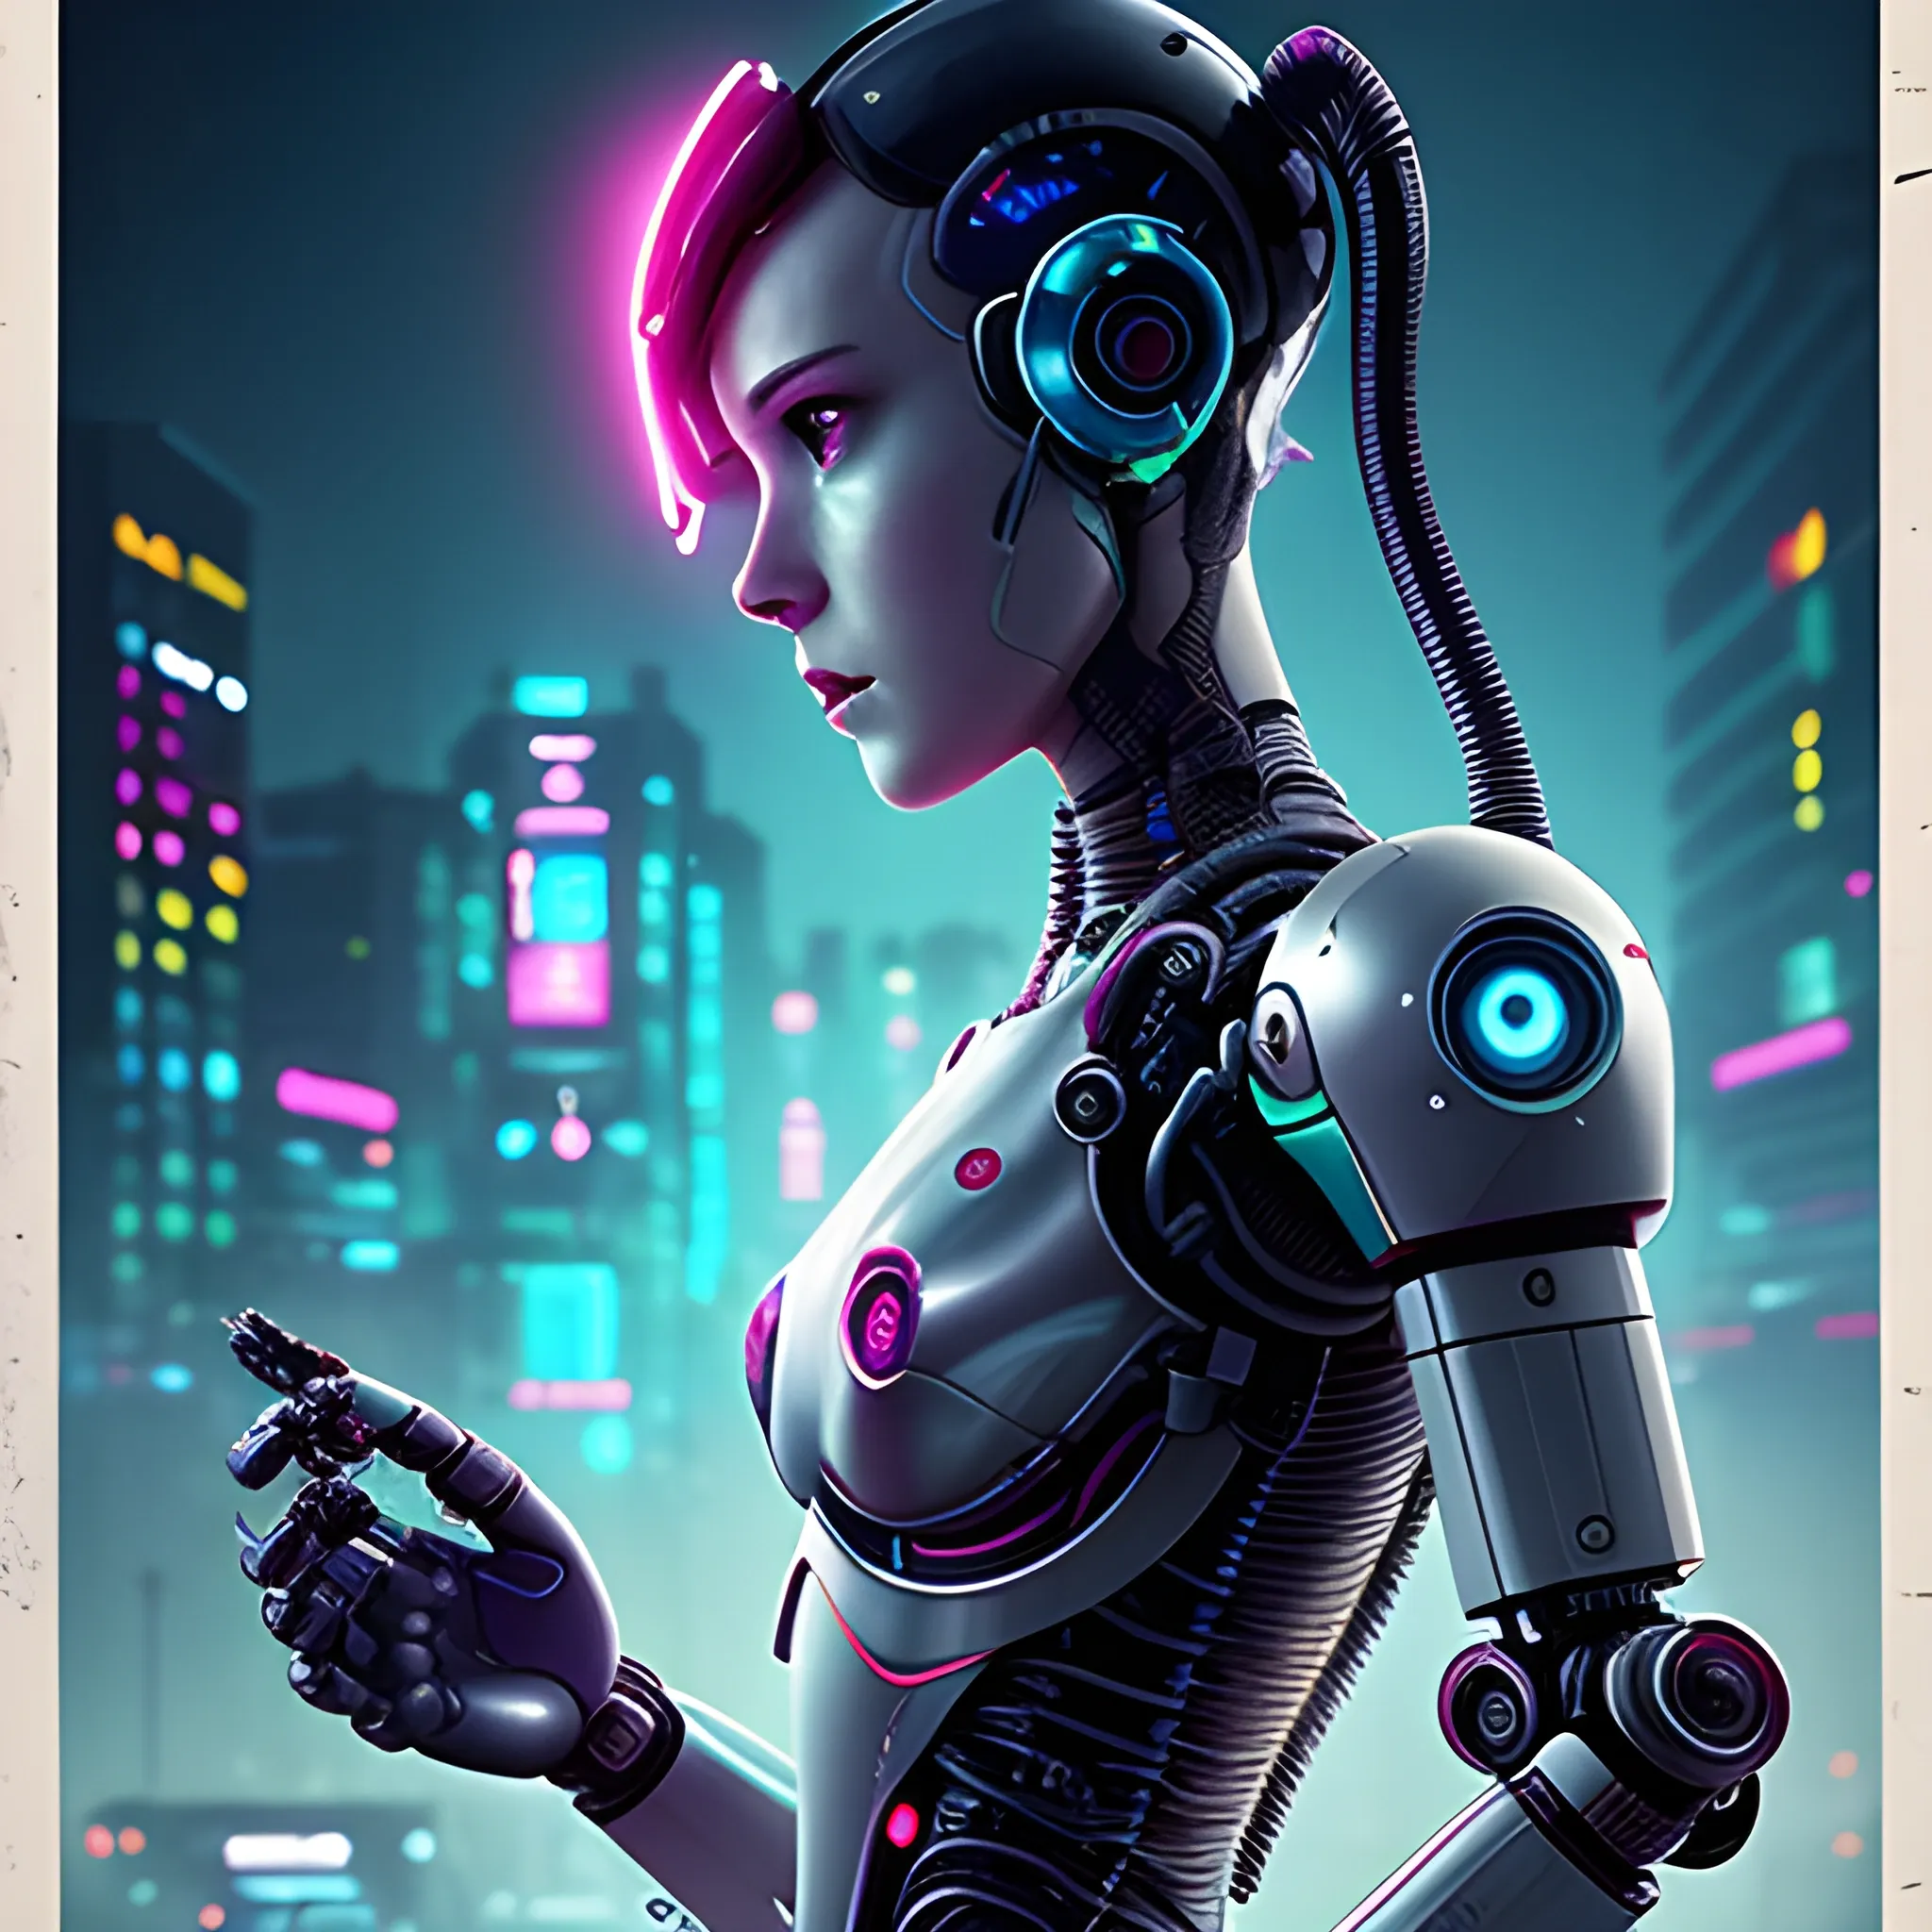 movie poster about robot love with cyberpunk esthetic, a single female protagonist character connected with cables and a human heart